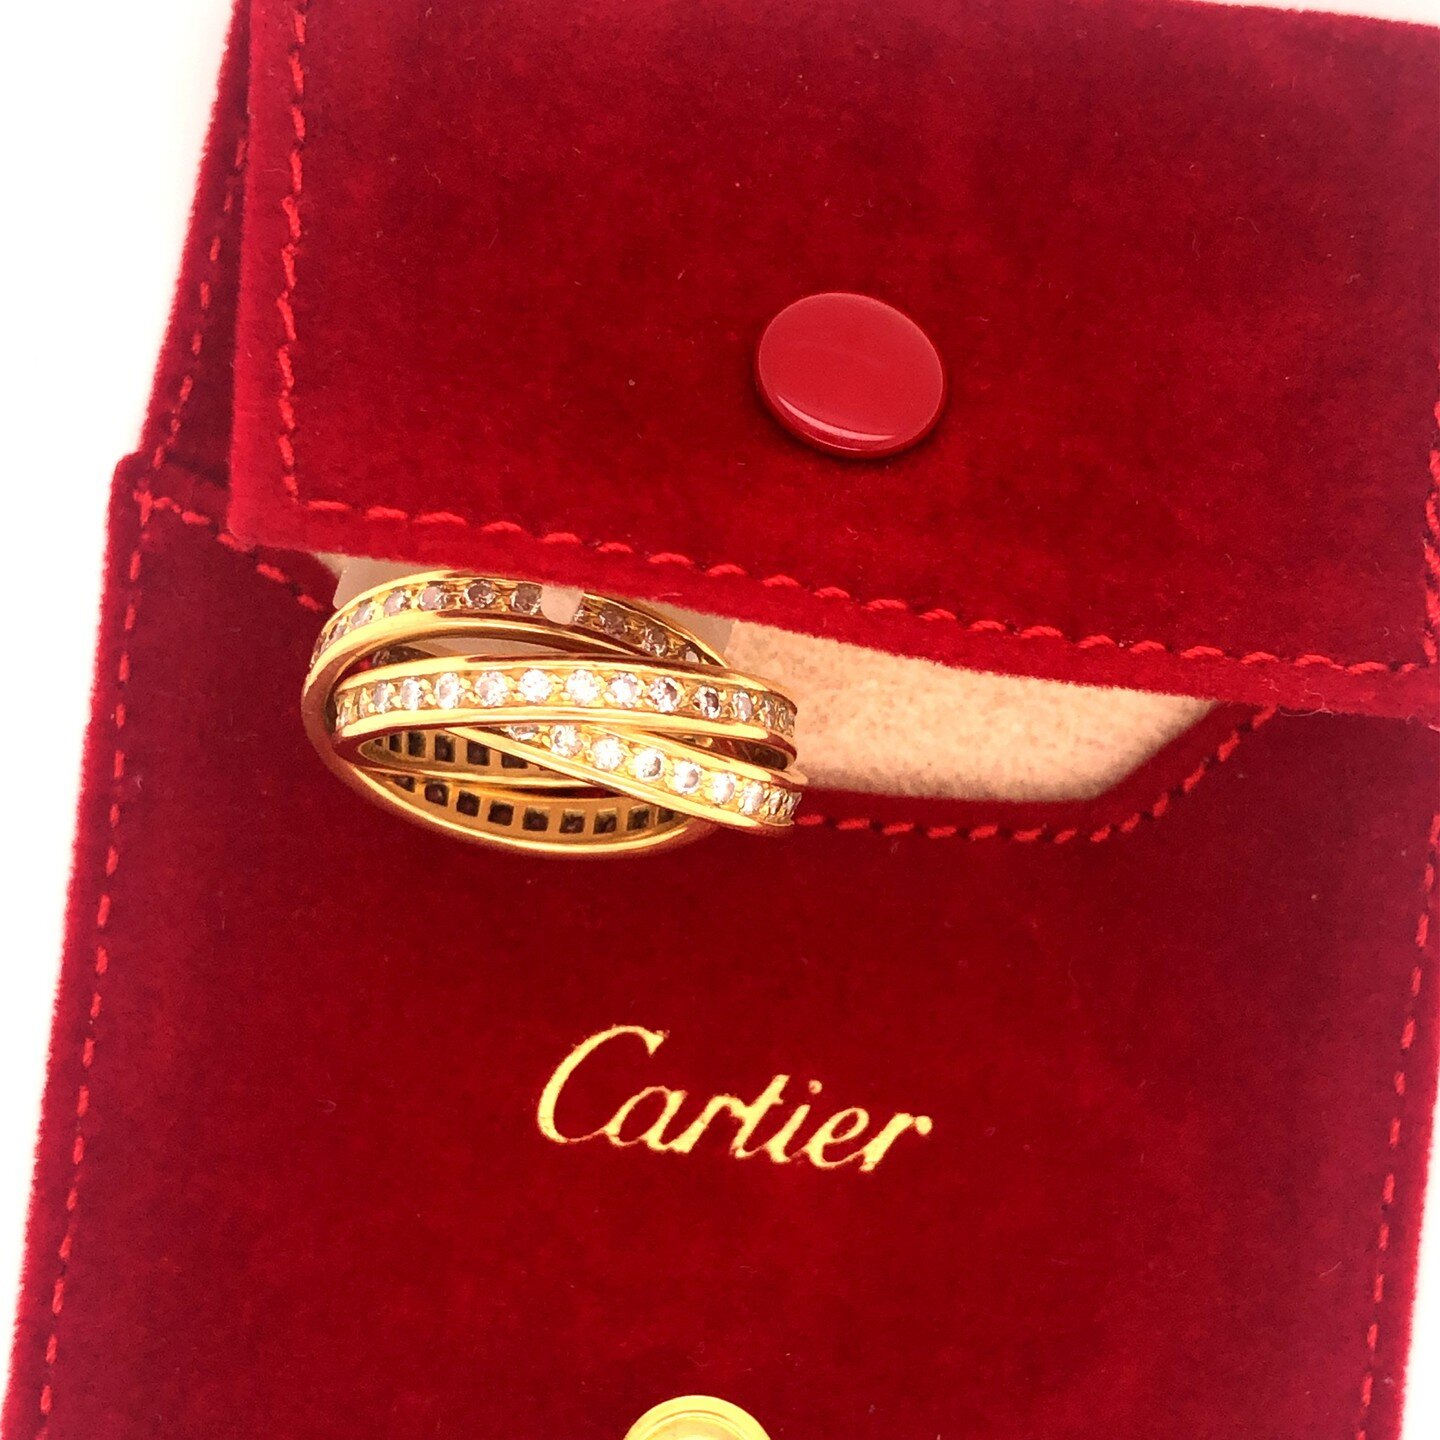 ✨Stepping into this work week with this beauty‼️ This Cartier Diamond Trinity Band 💍 just dropped on our site, go to our Bio to get a closer look‼️
.
.
.
#cartier #18kgold #cartierdiamondband #showmeyourrings #instajewelry #estatejewelry #weddingban